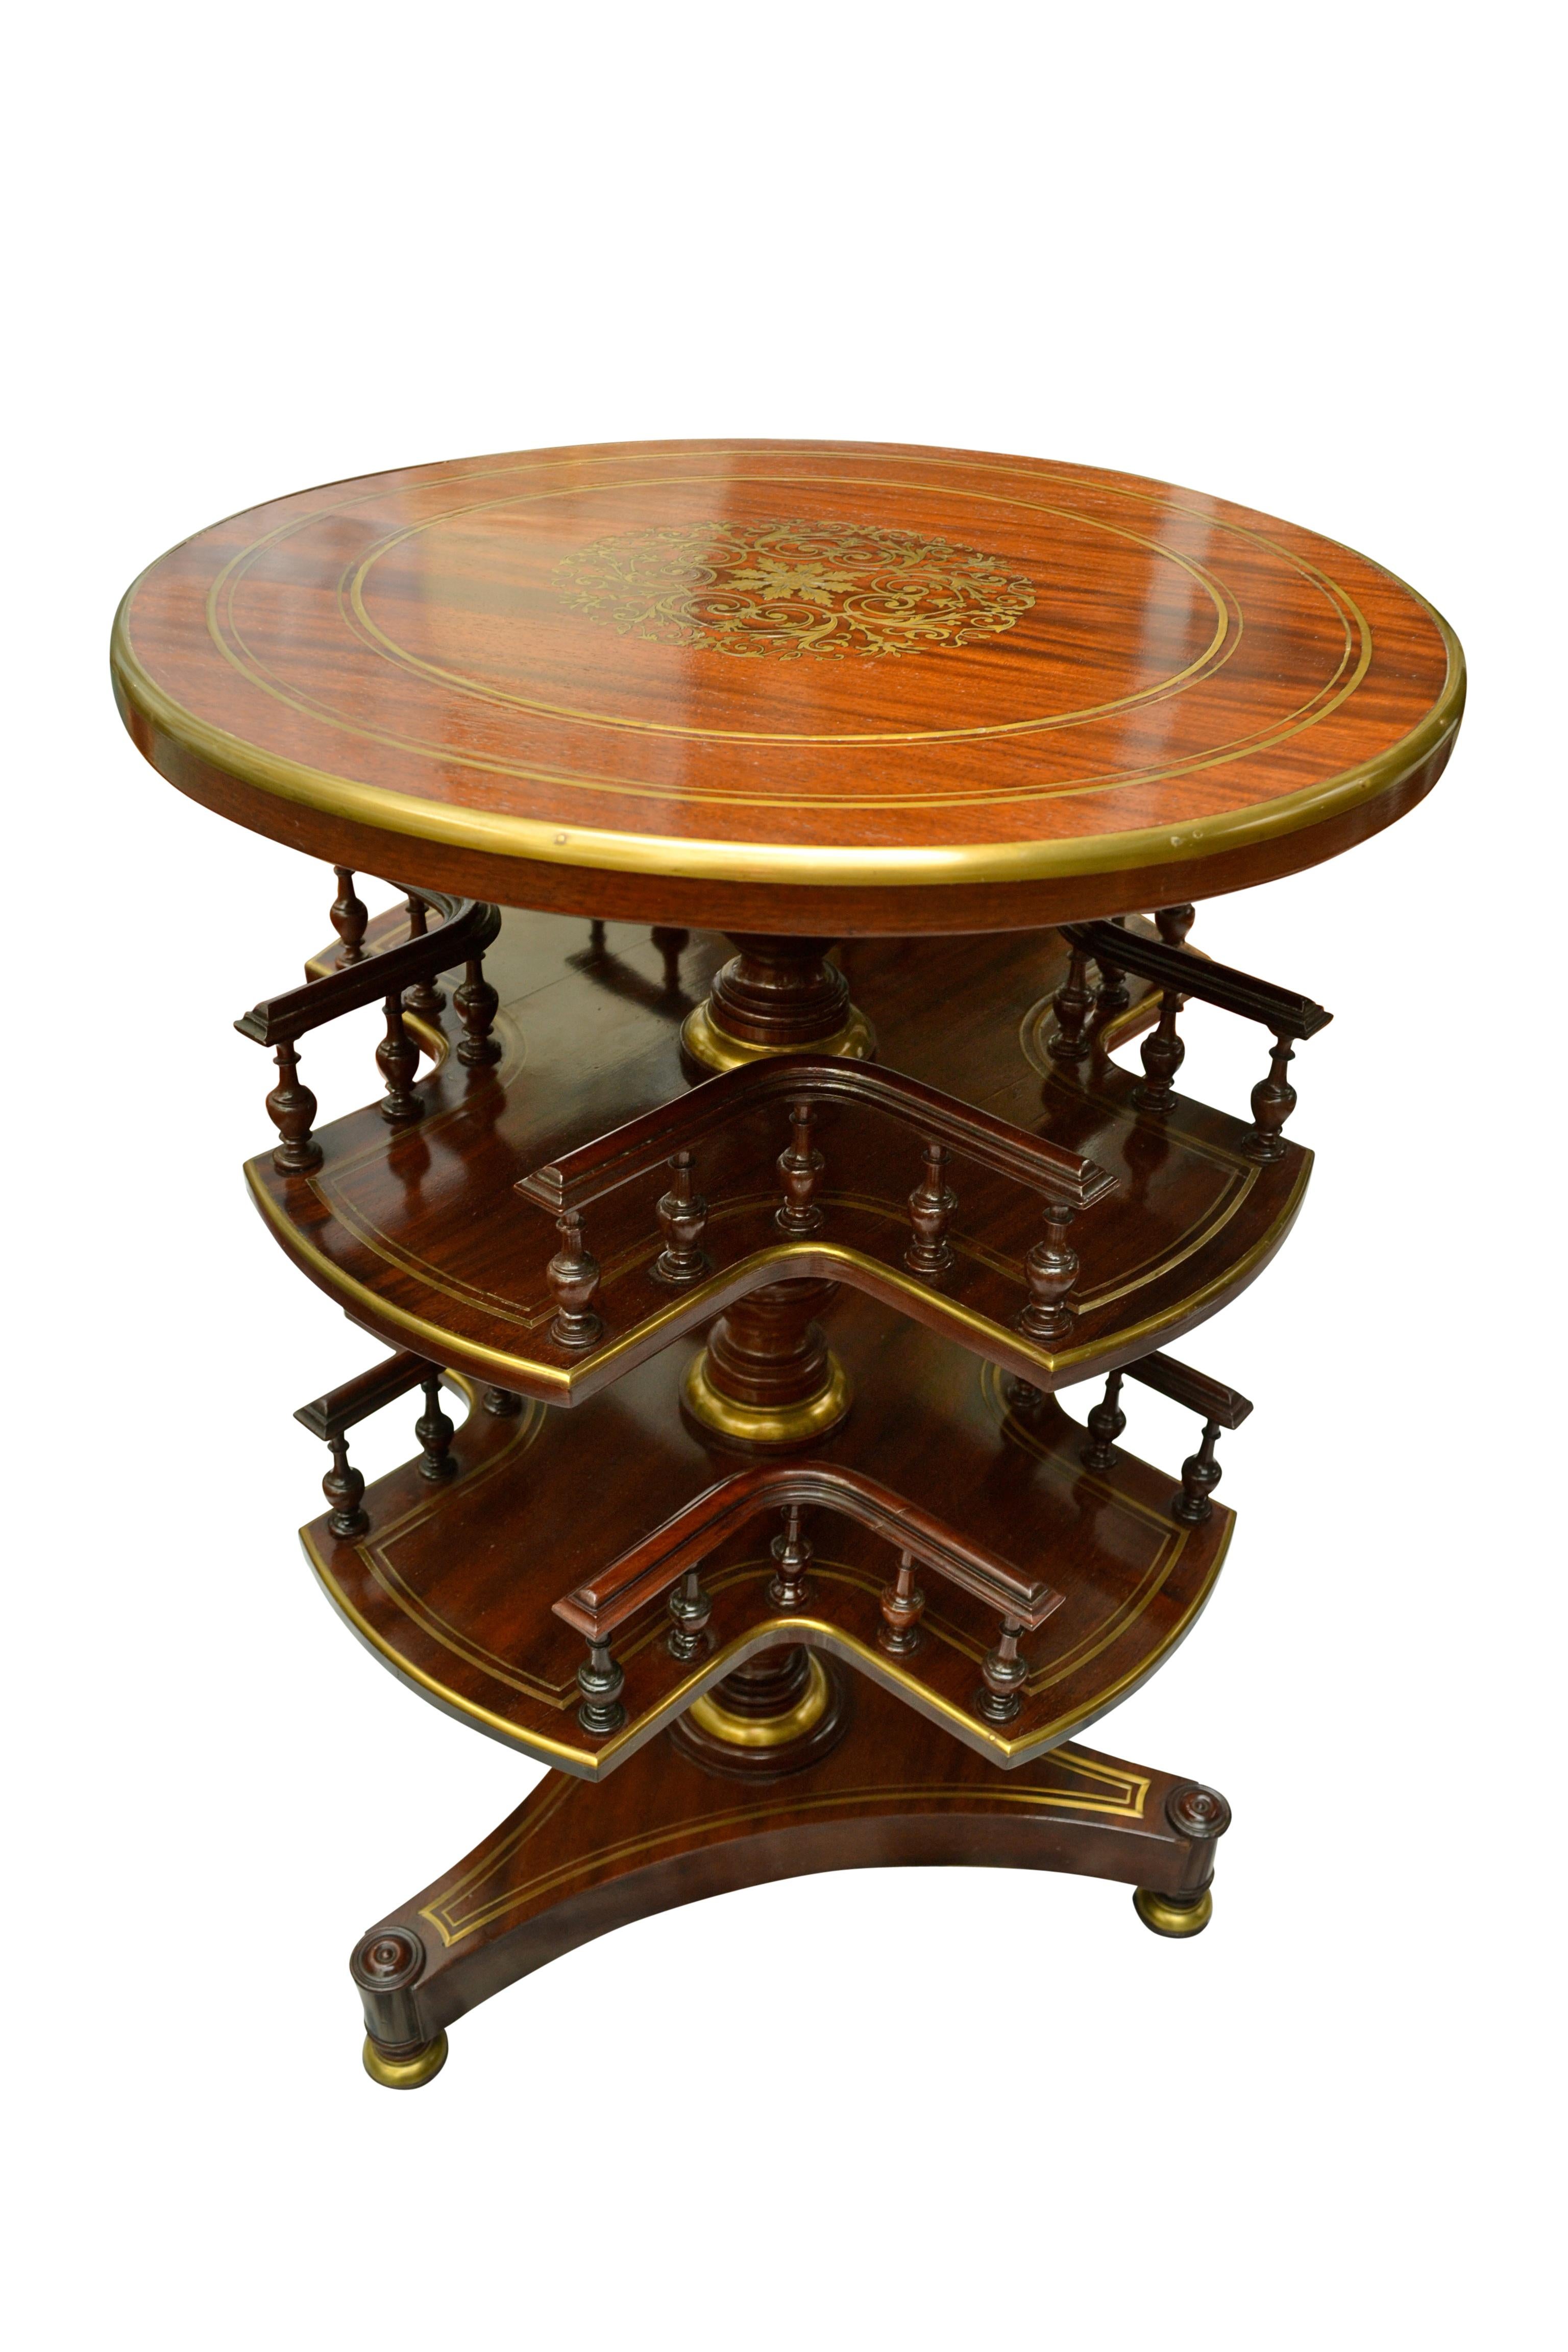 A circular mahogany and inlaid brass library table, with two tiers of revolving book/CD/liqour bottle and glasses shelves below the fixed top, all supported on a circular turned column joining a tri-form base. The top has a central brass inlaid